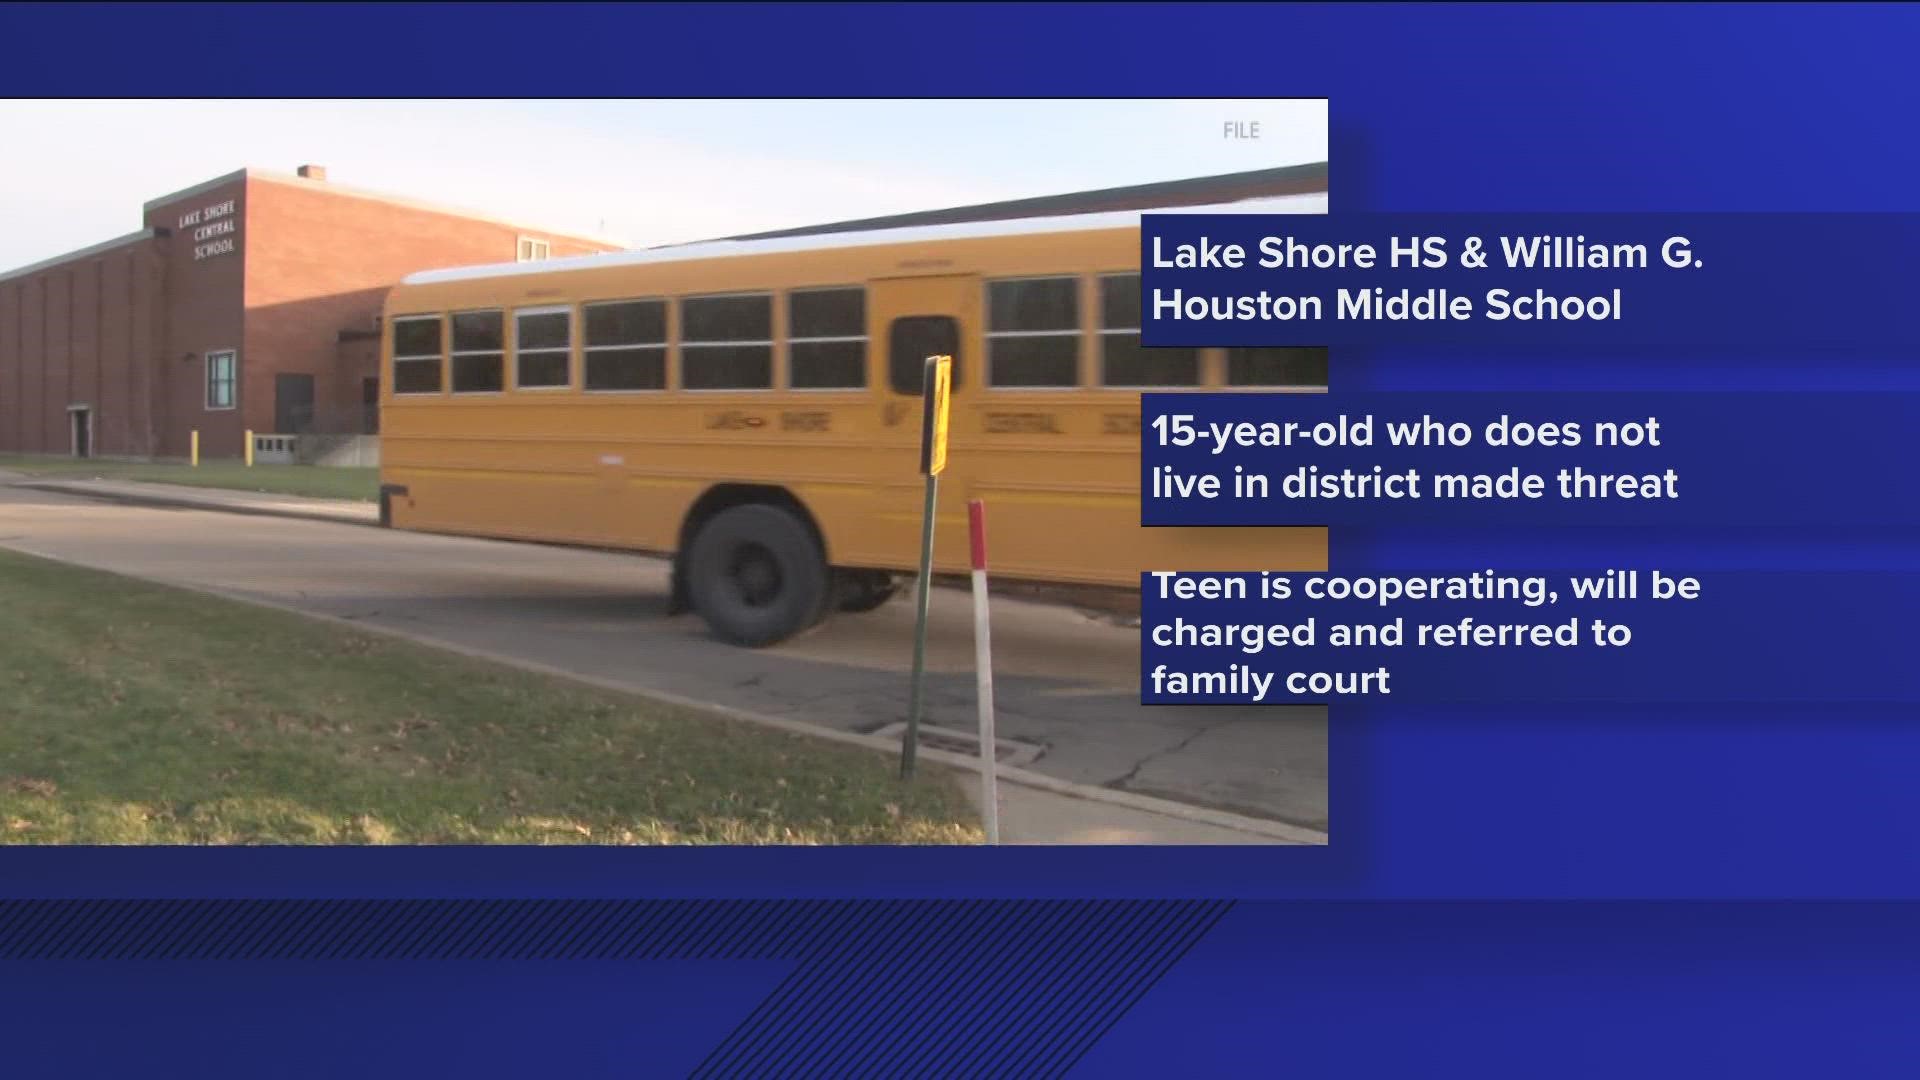 Police say a 15-year-old who does not live in the Lake Shore Central School District made the threat.